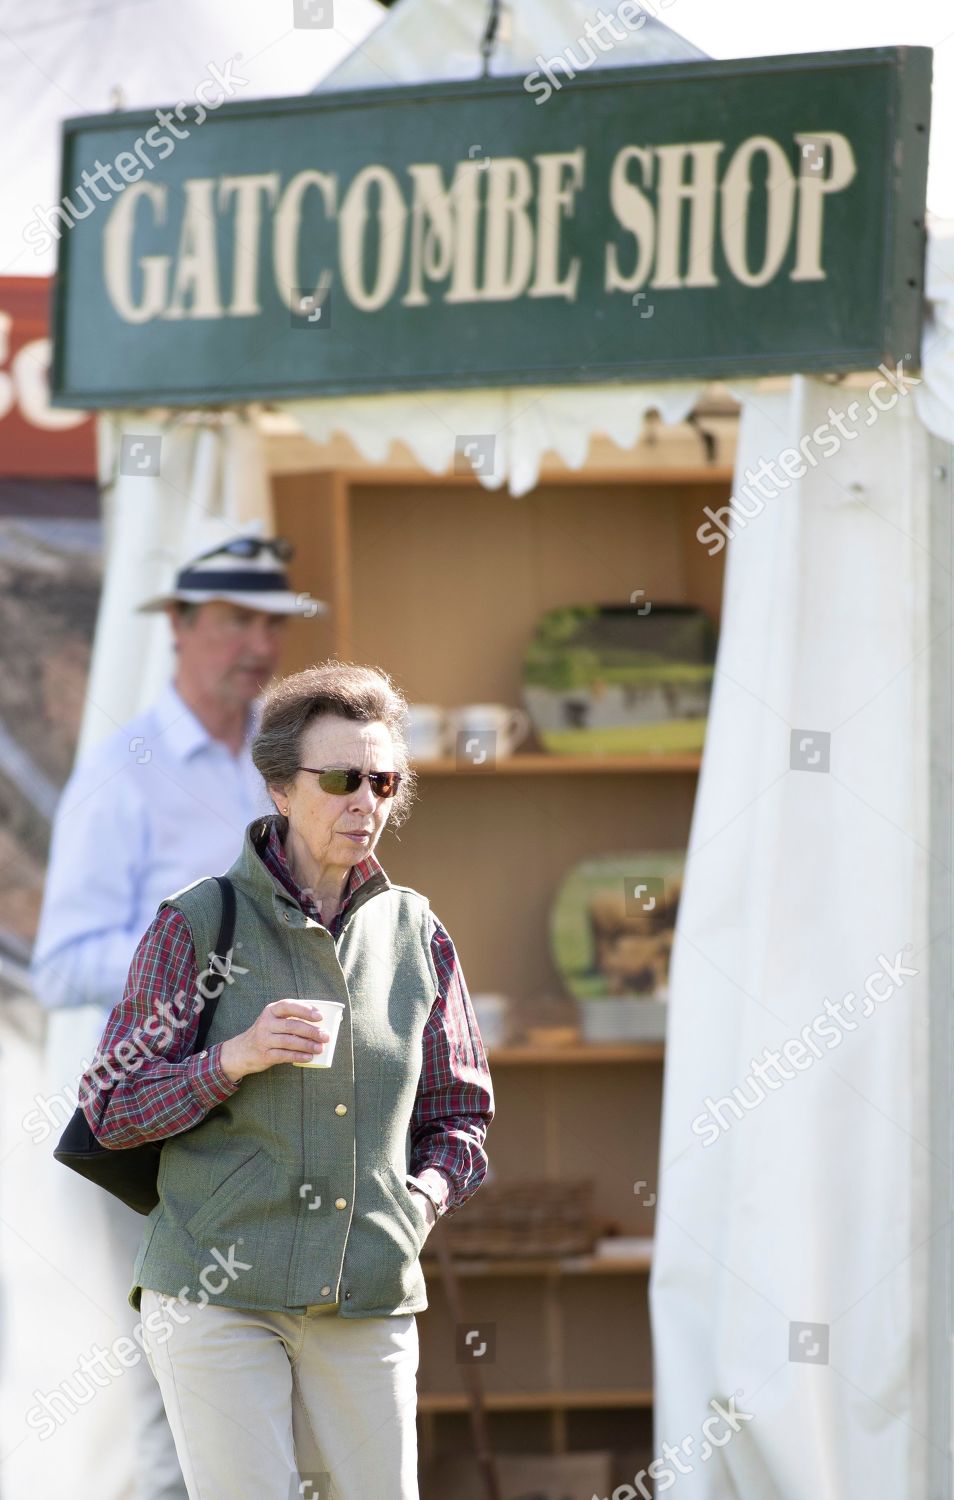 the-whatley-manor-horse-trials-gatcombe-park-uk-shutterstock-editorial-10413907f.jpg